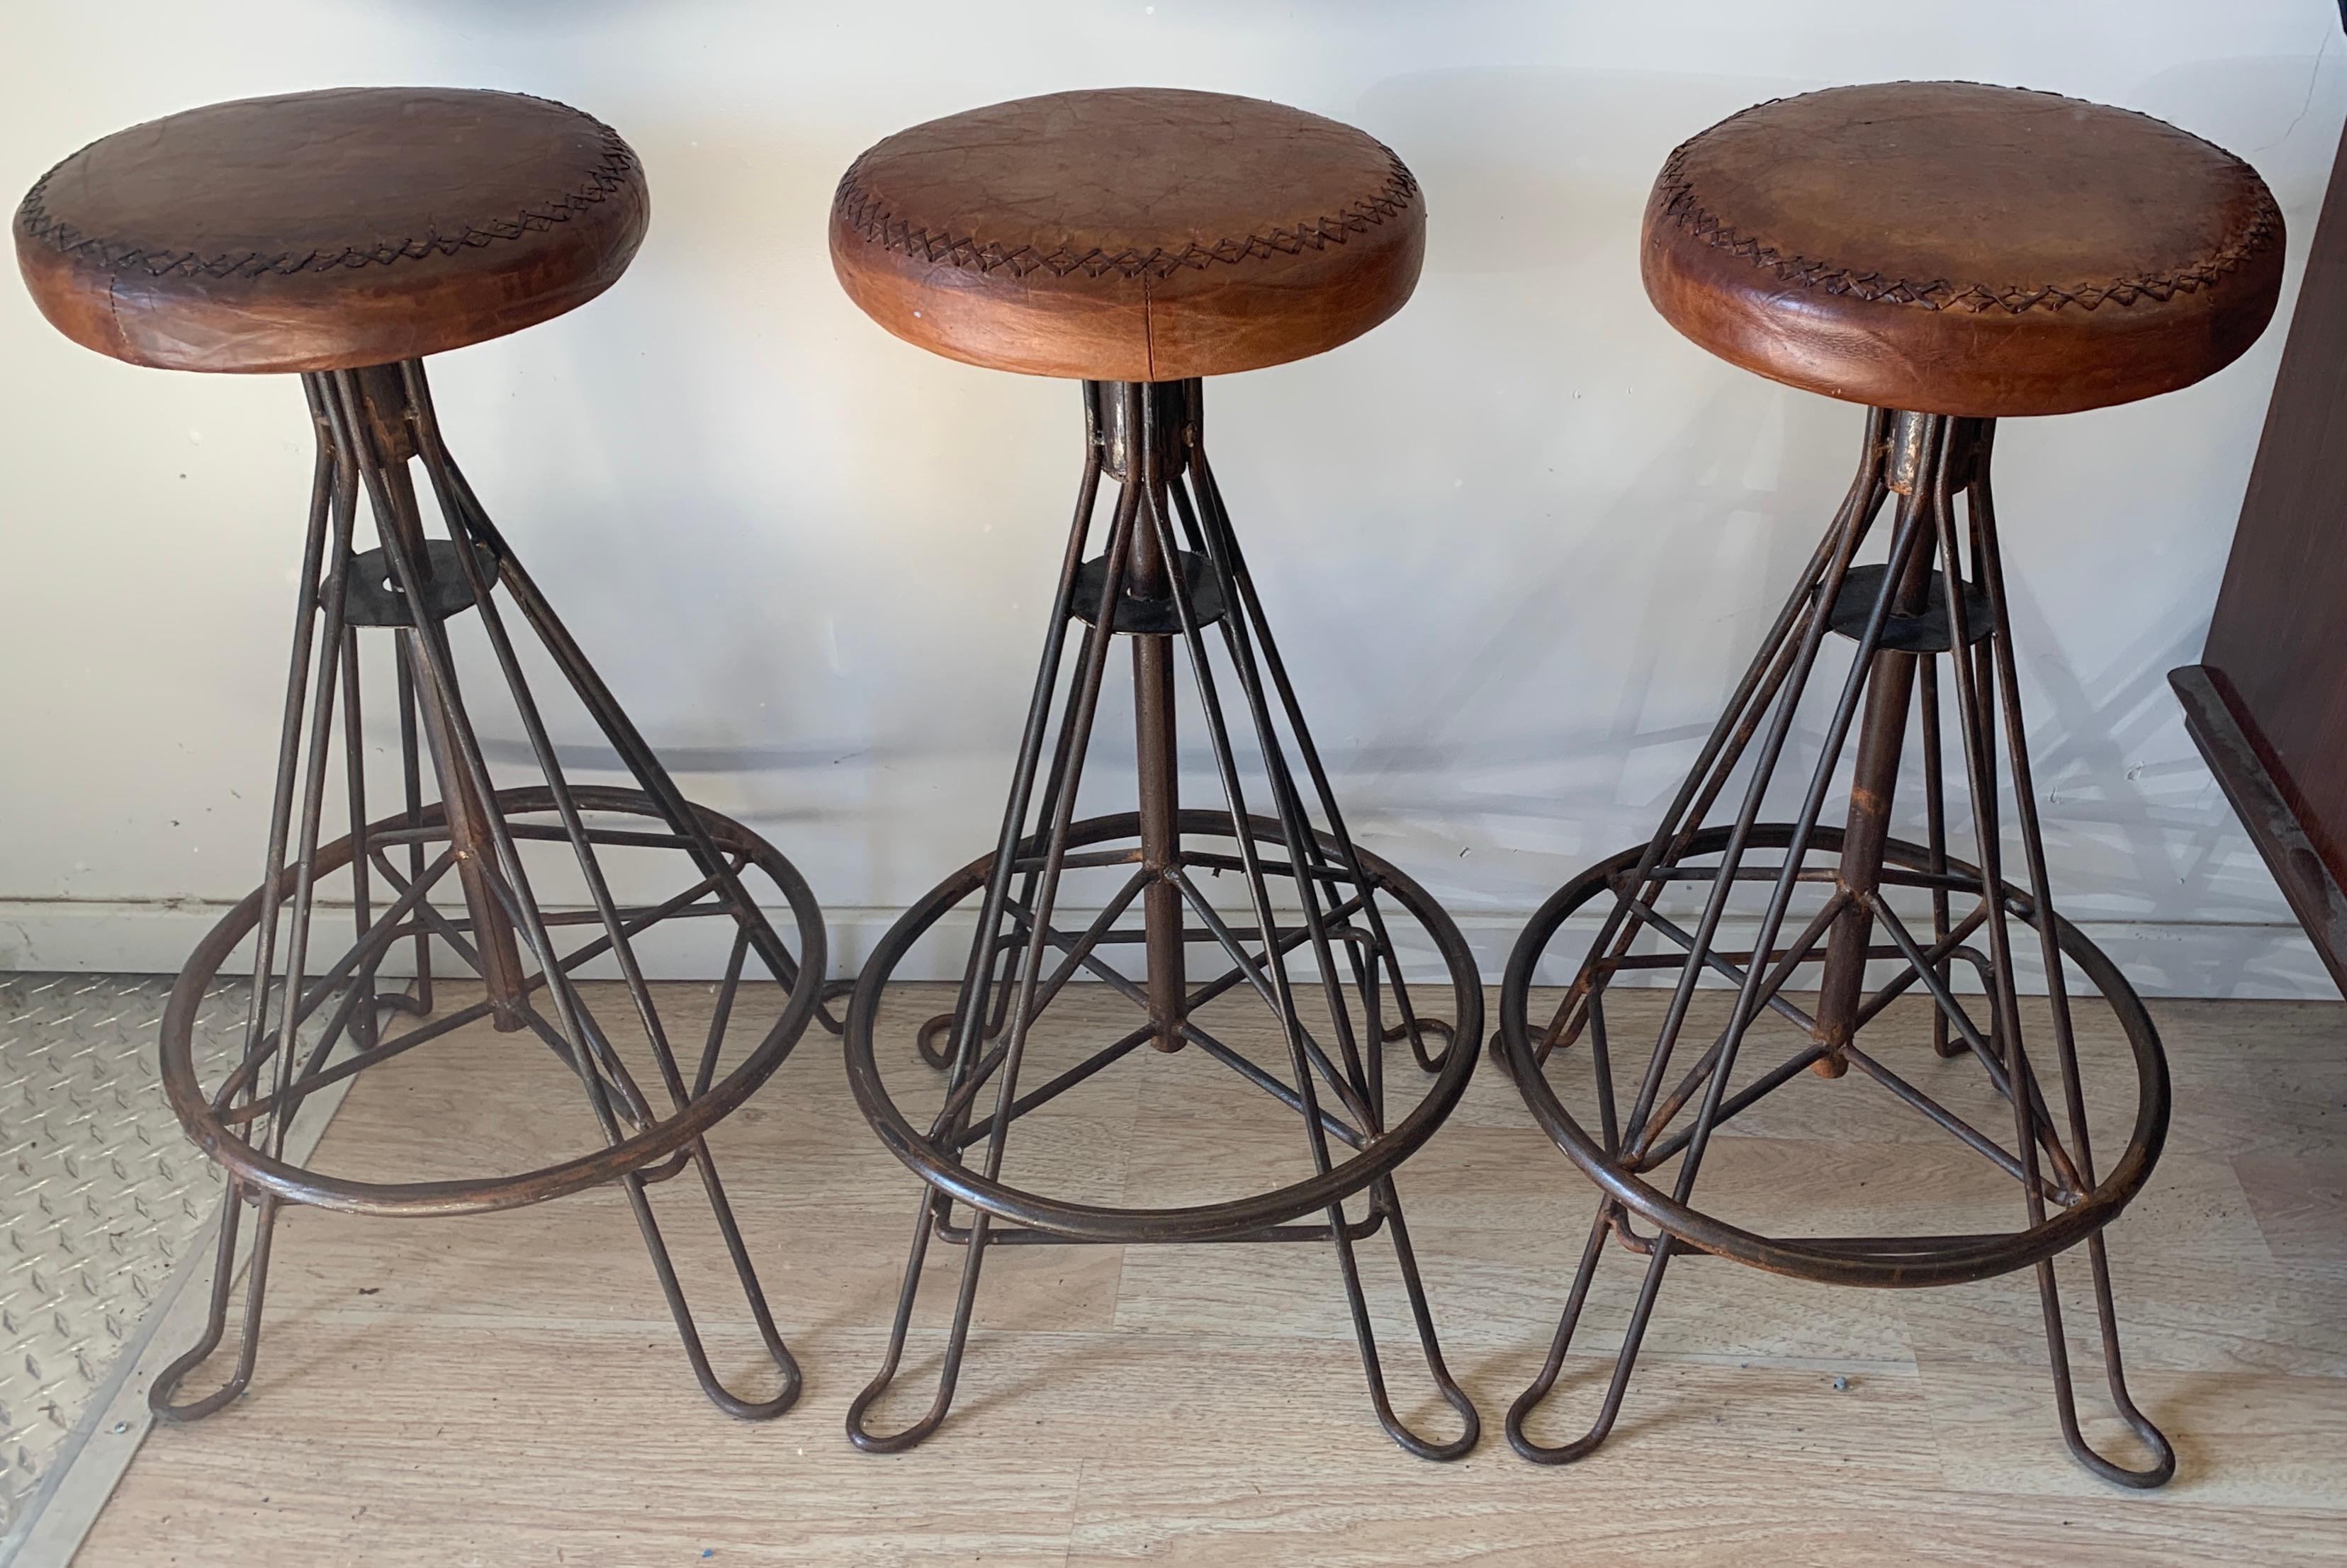 Organic Modern Set of Three Wrought Iron and Stitched Leather Bar Stools